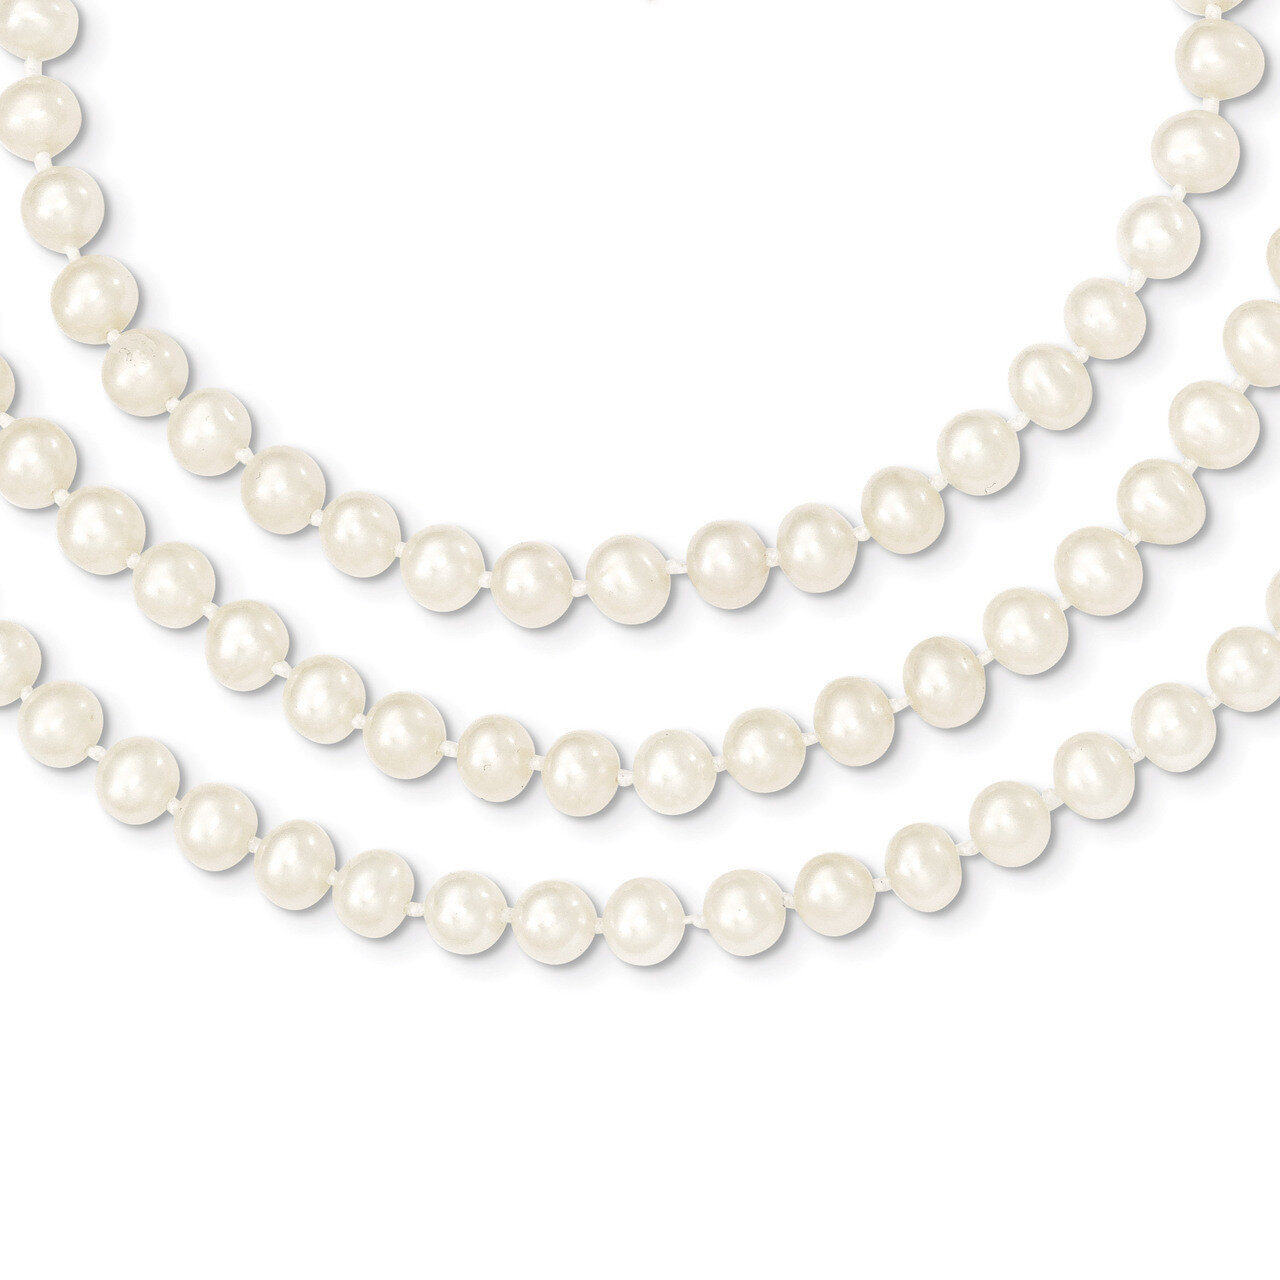 6-6.5mm 3 Strand Cultured Pearl Necklace 18 Inch 14k Gold PR10-18